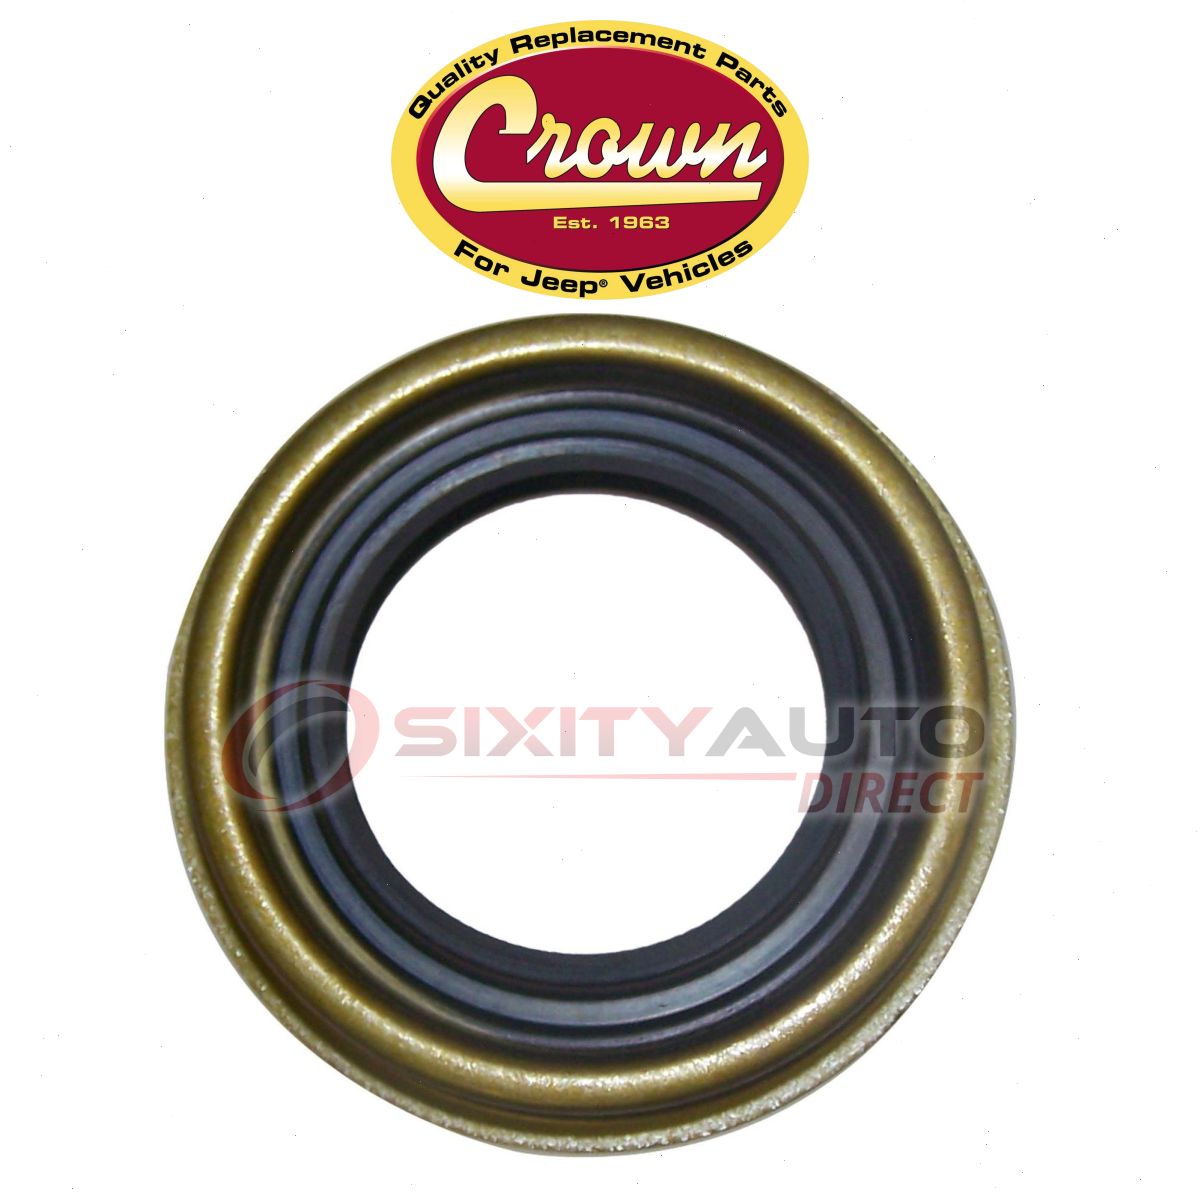 Crown Automotive Rear Left Axle Shaft Seal for 2002-2006 Dodge Ram 1500 2005 Dodge Ram 1500 Rear Axle Seal Replacement